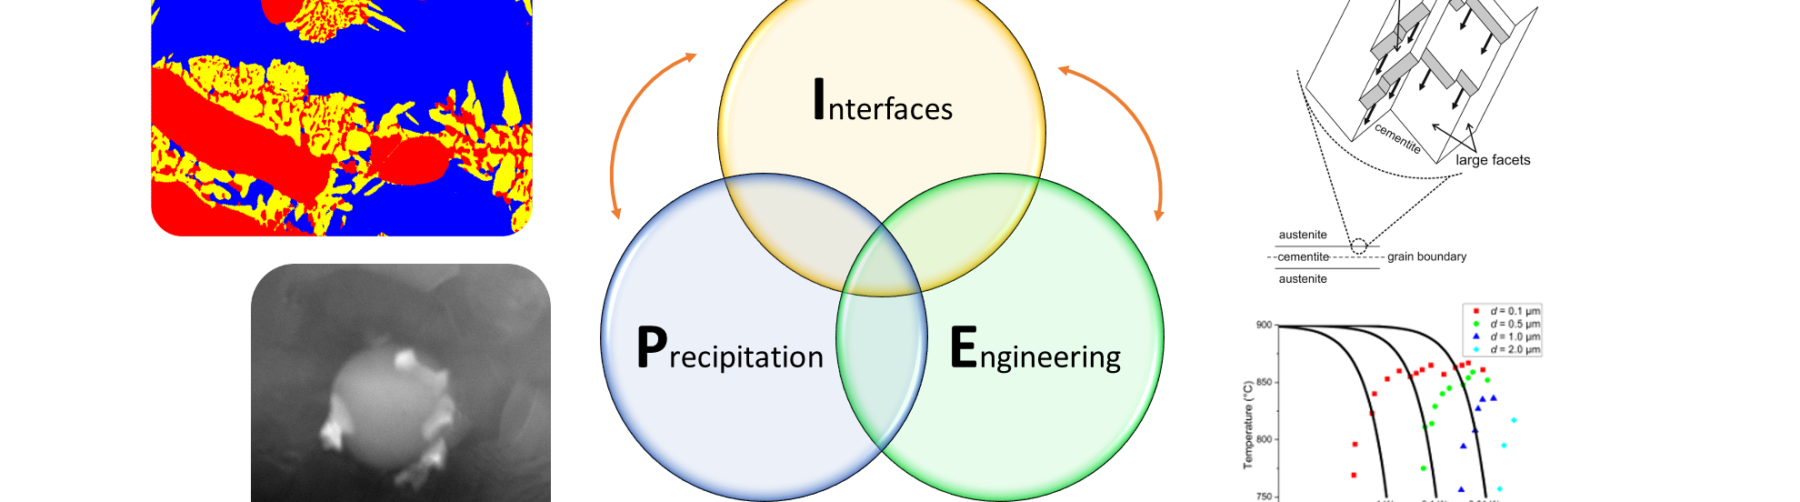 CDL IPE overview scheme showing the interplay of interfaces and precipitation and related engineering approaches